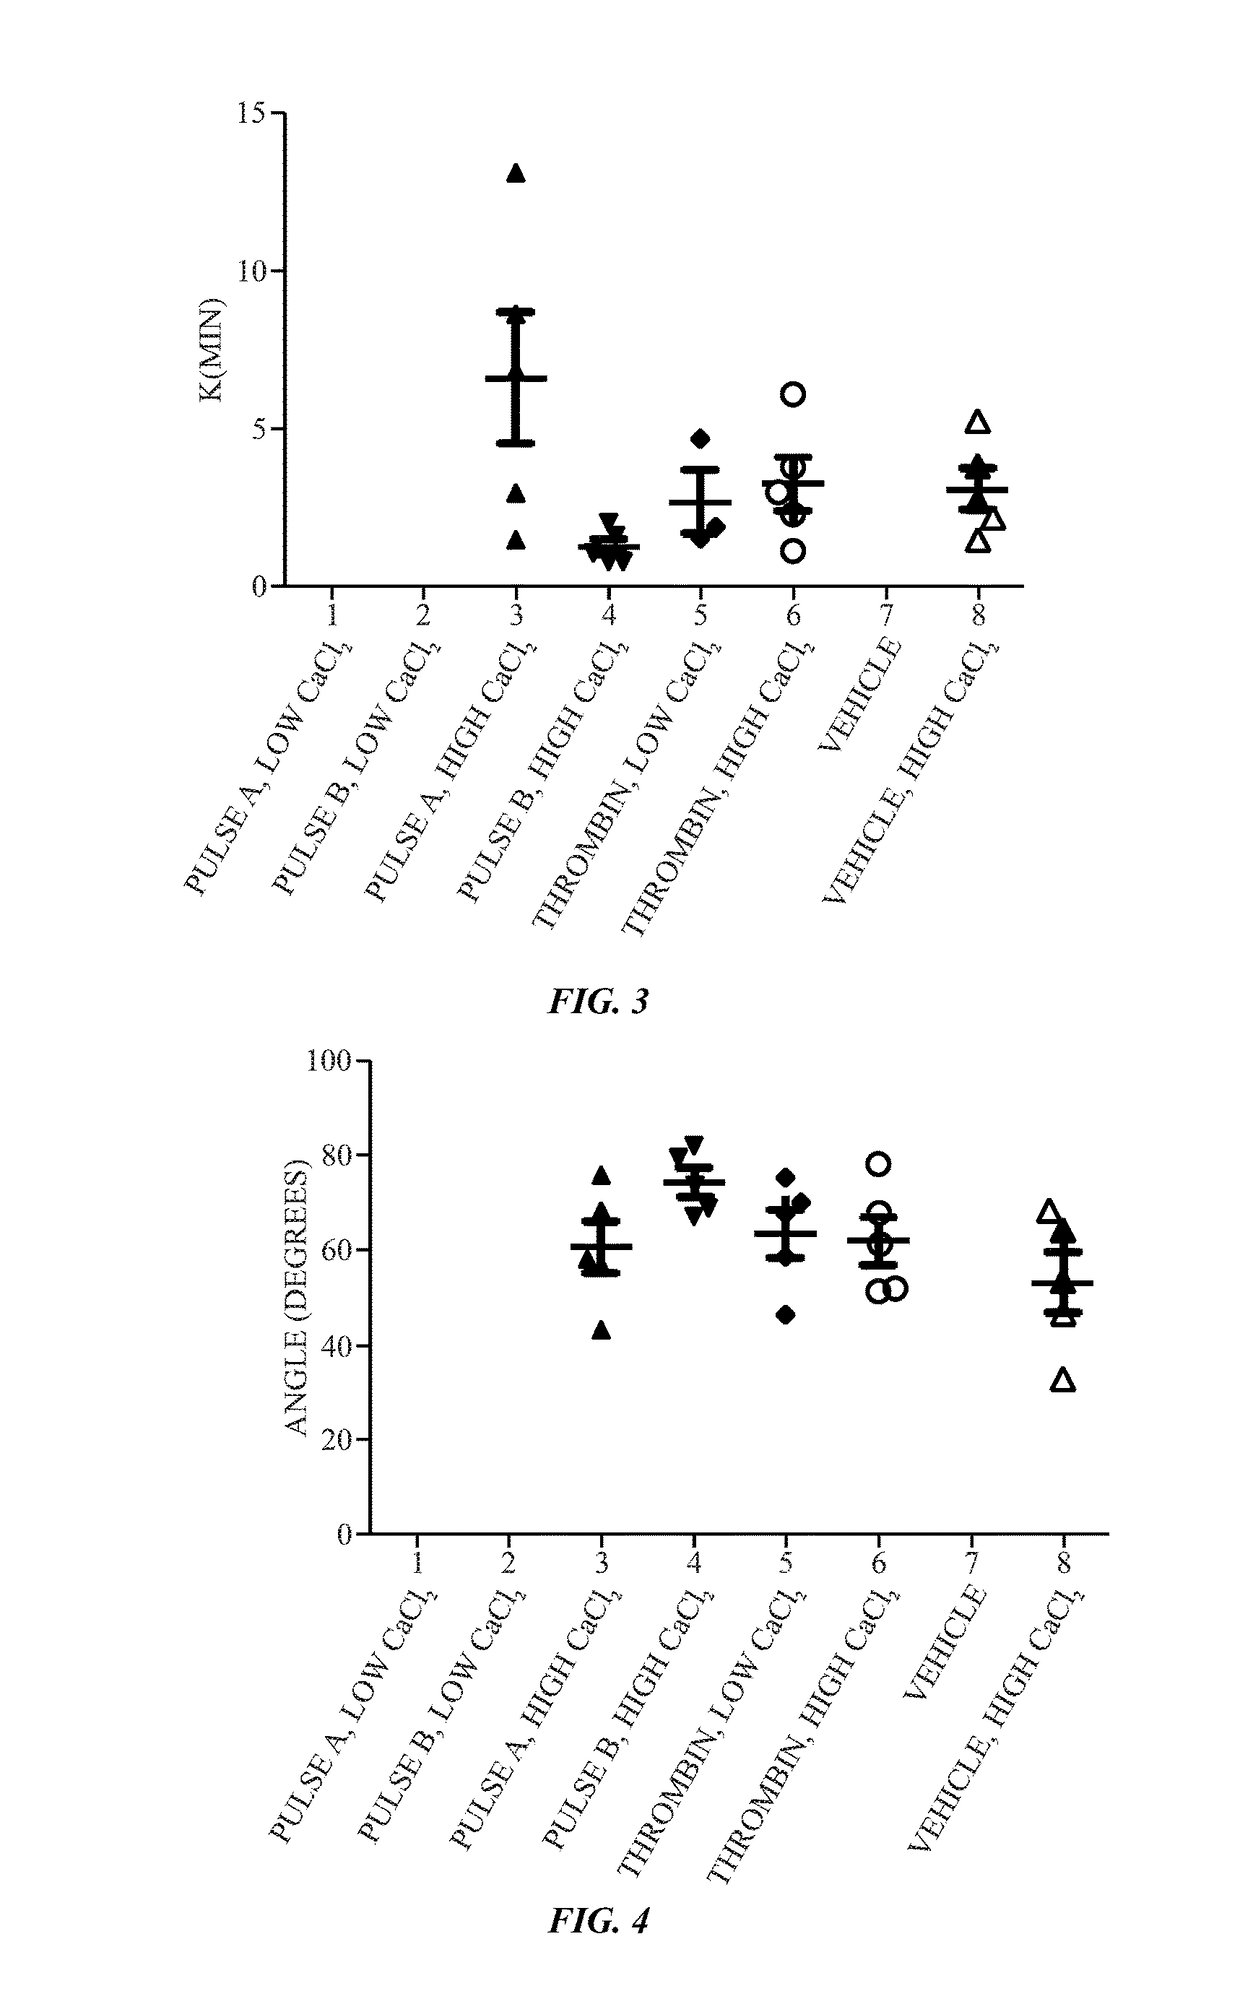 Calcium controlled activation of platelets via electrical stimulation